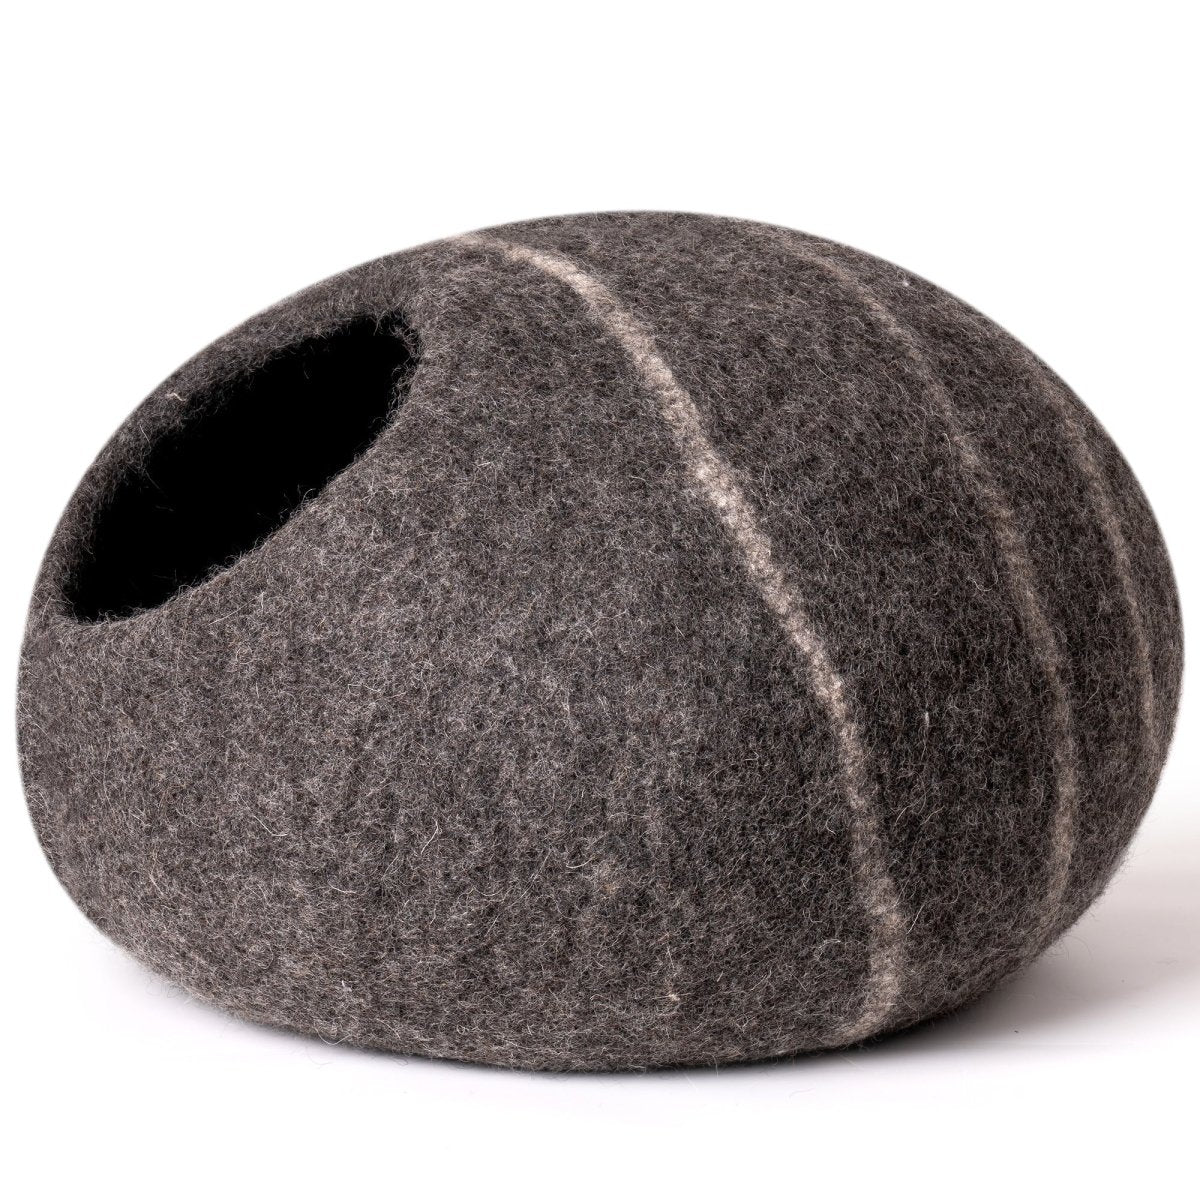 MewooFun Trendy Felt Cat Bed Cave Round Nest Wool Bed Gray for Cats - Taplike